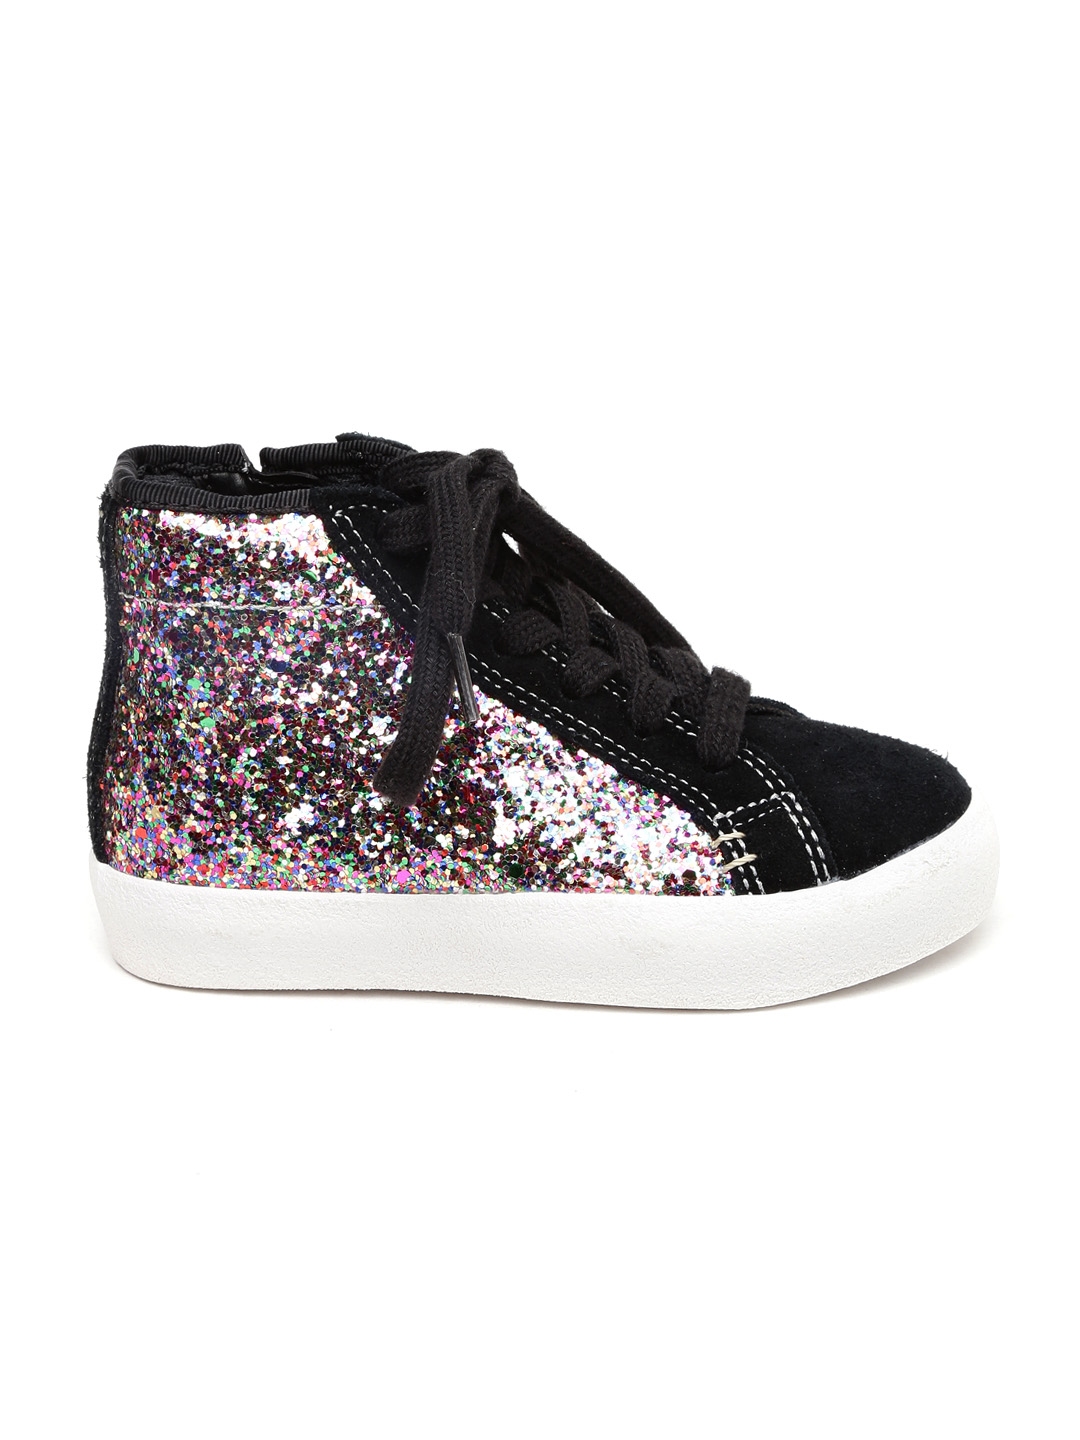 Buy Clarks Girls Multicolour Textured High Top Sneakers - Casual Shoes ...